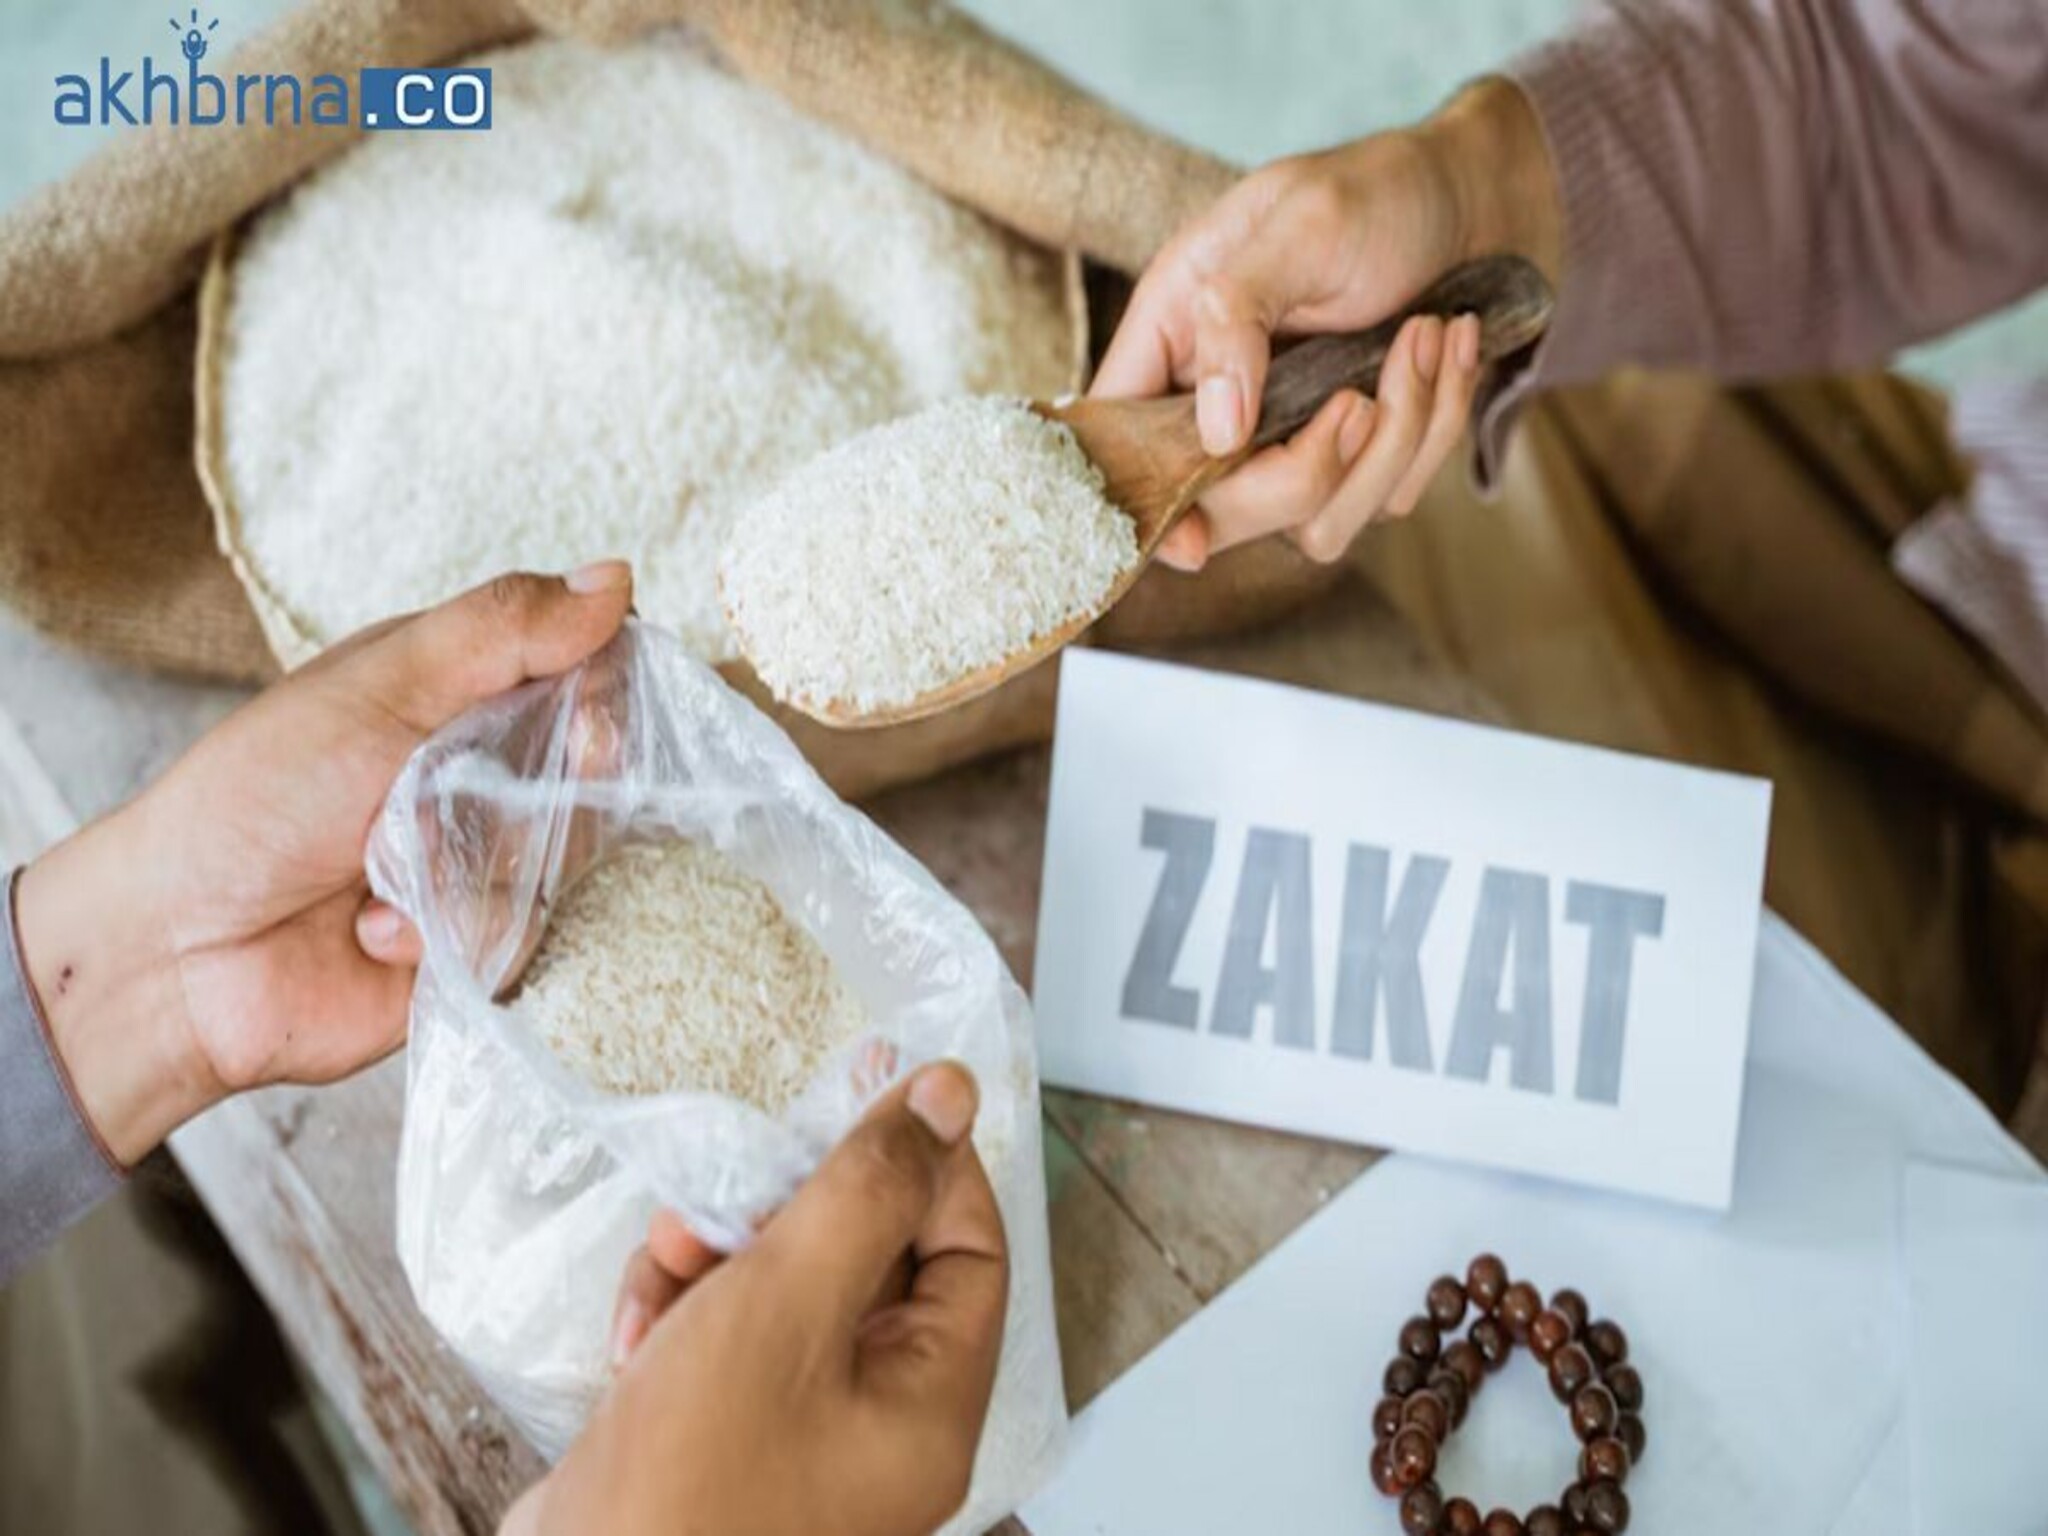 Emirates Iftaa Sharia issues a statement clarifying the types of zakat